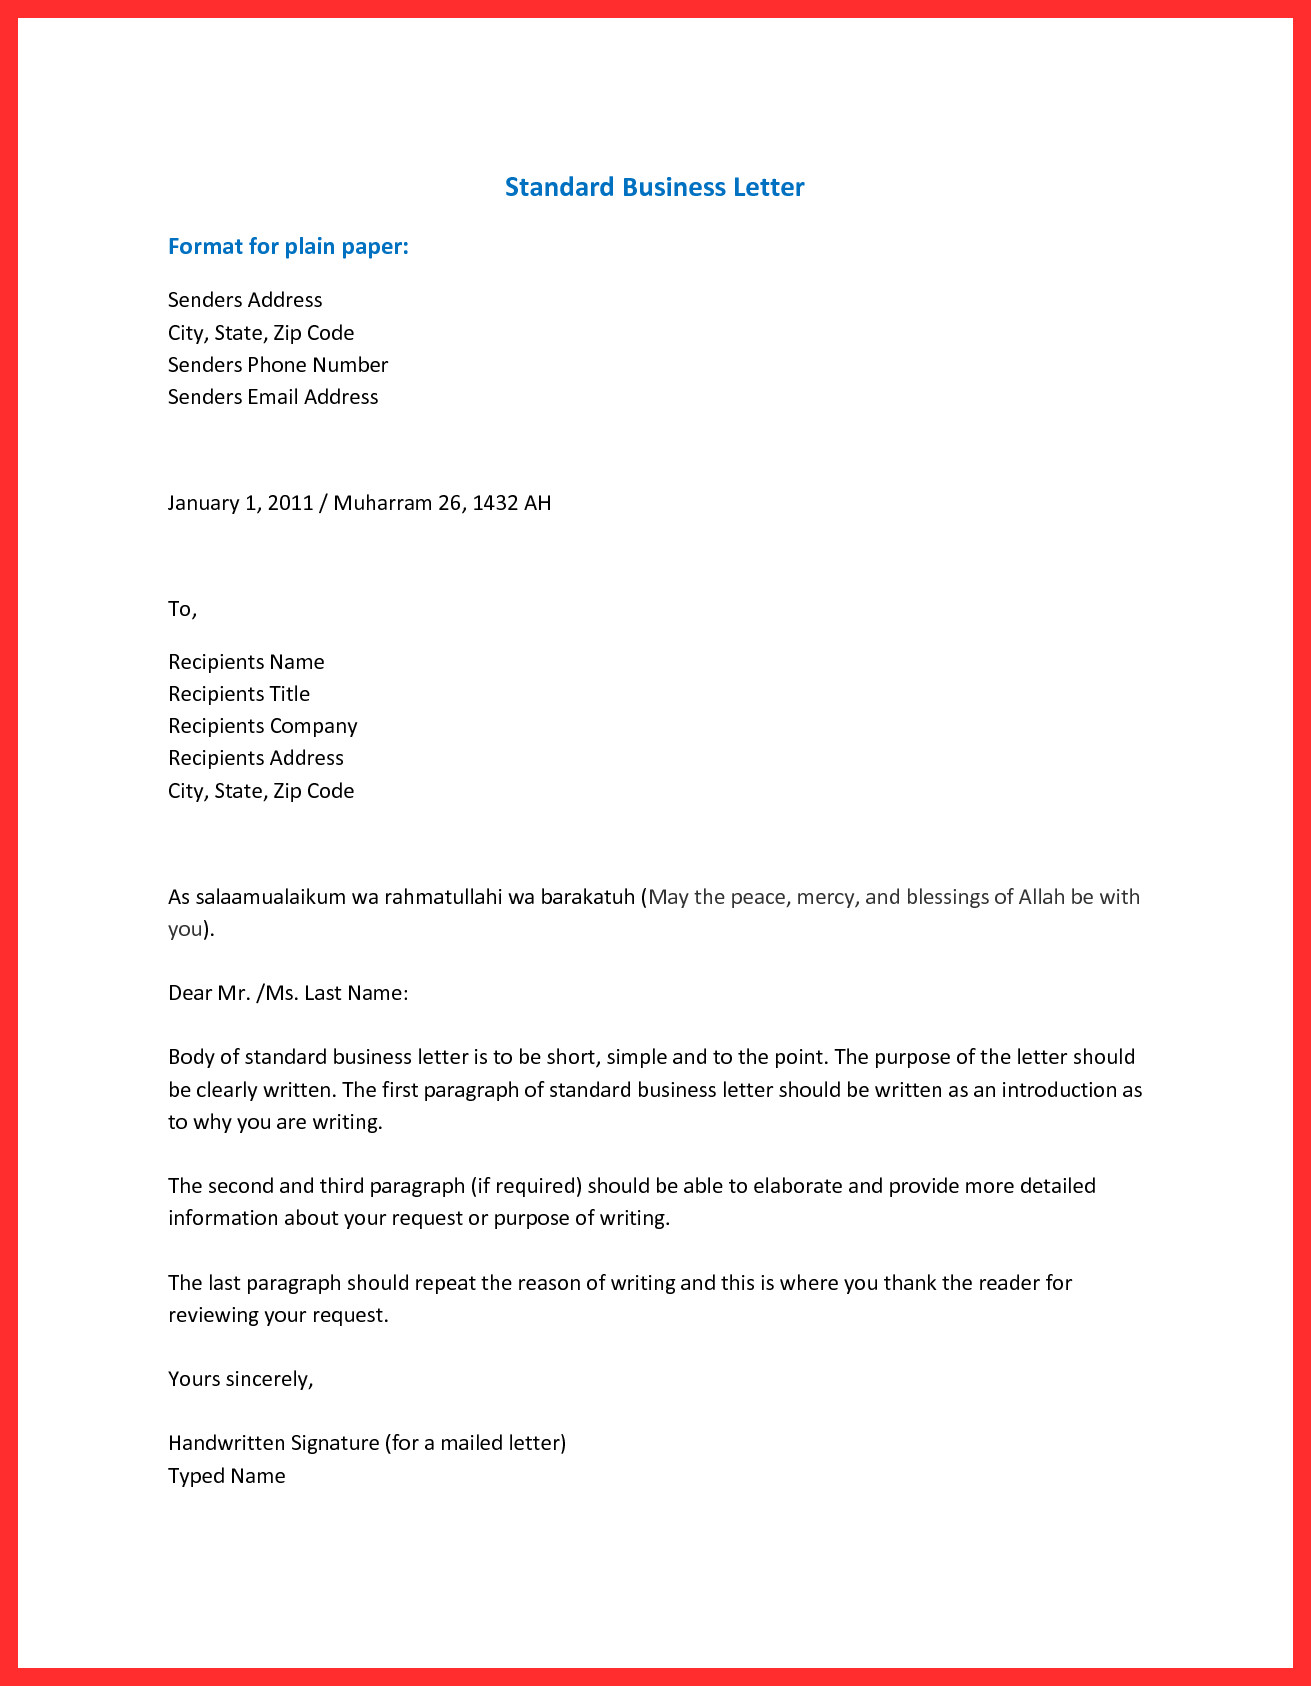 Business letter set up how end a the best sample for writing 